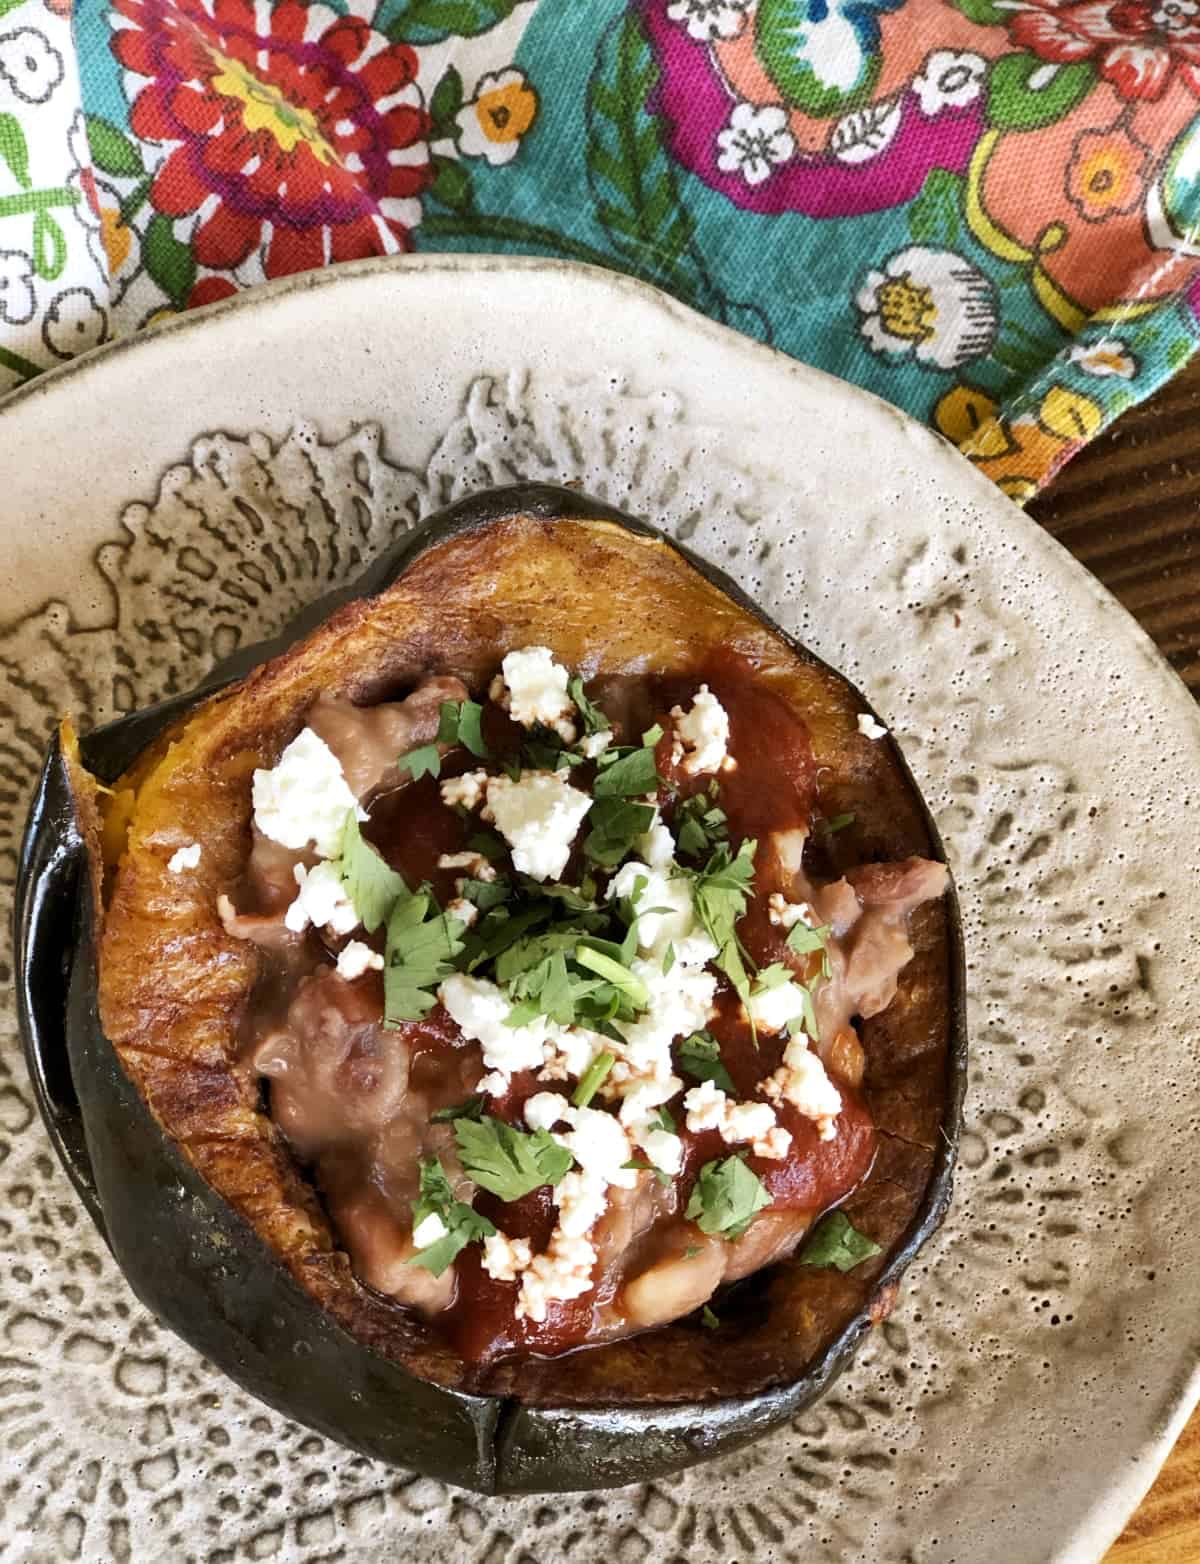 Roasted acorn squash with pintos, red chili sauce, crumbled cheese and cilantro on pottery plate.